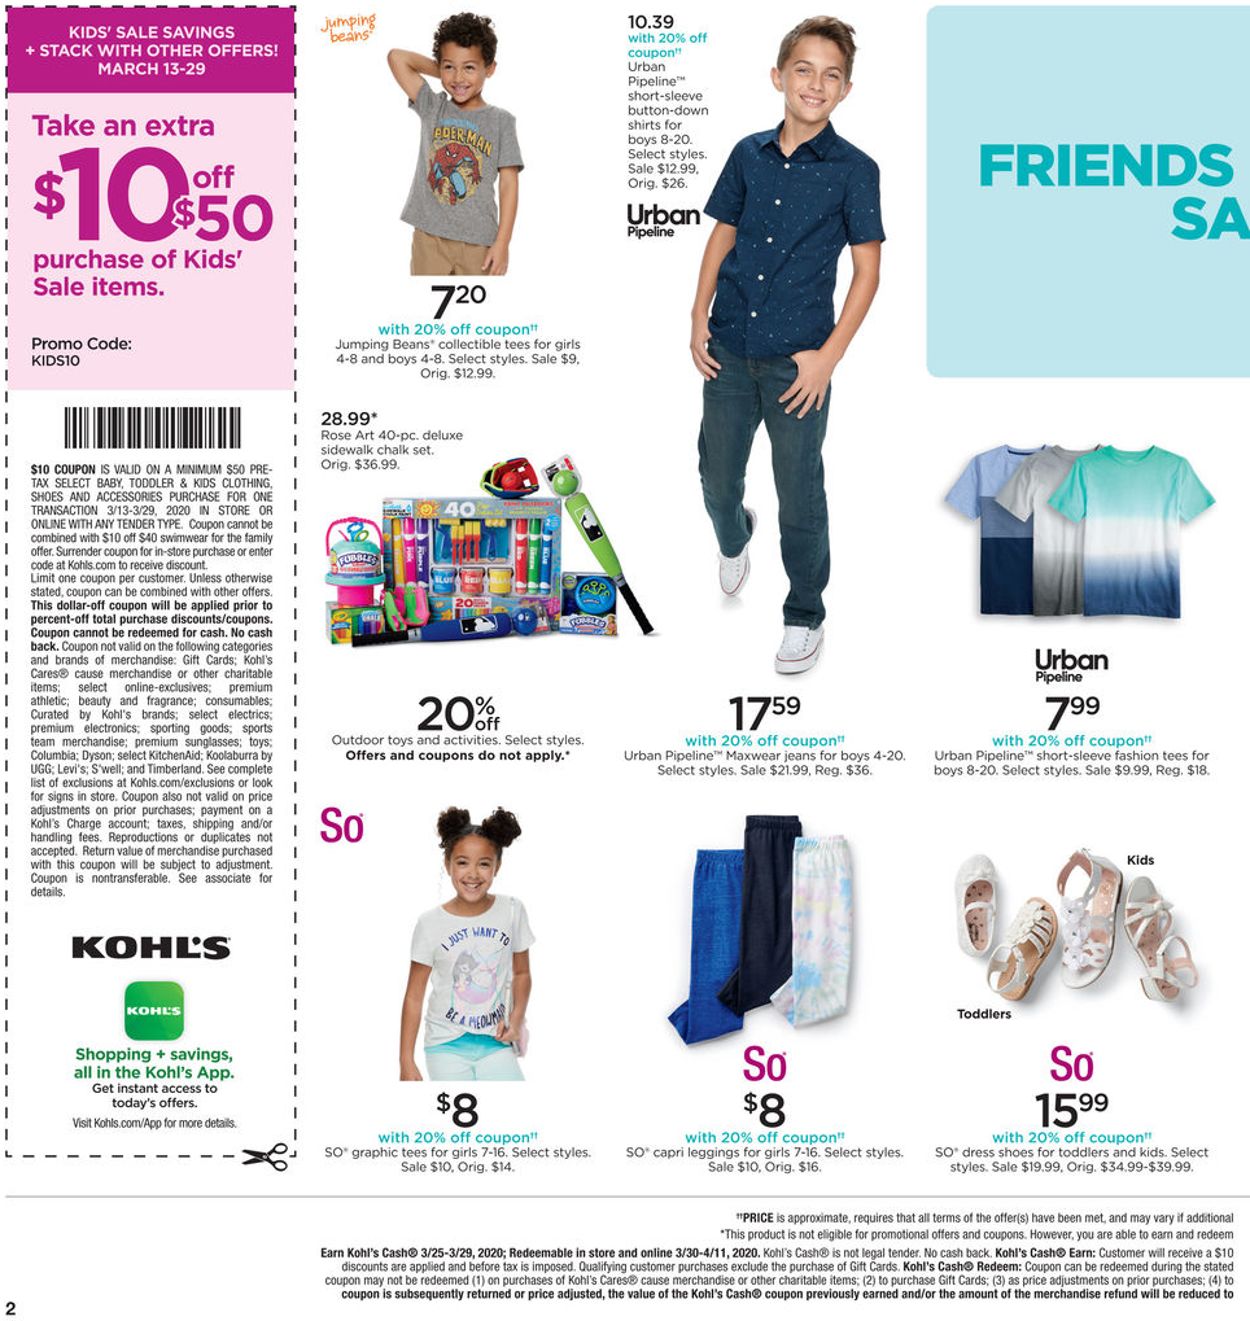 Kohl's Current weekly ad 03/25 - 03/29/2020 [2] - frequent-ads.com